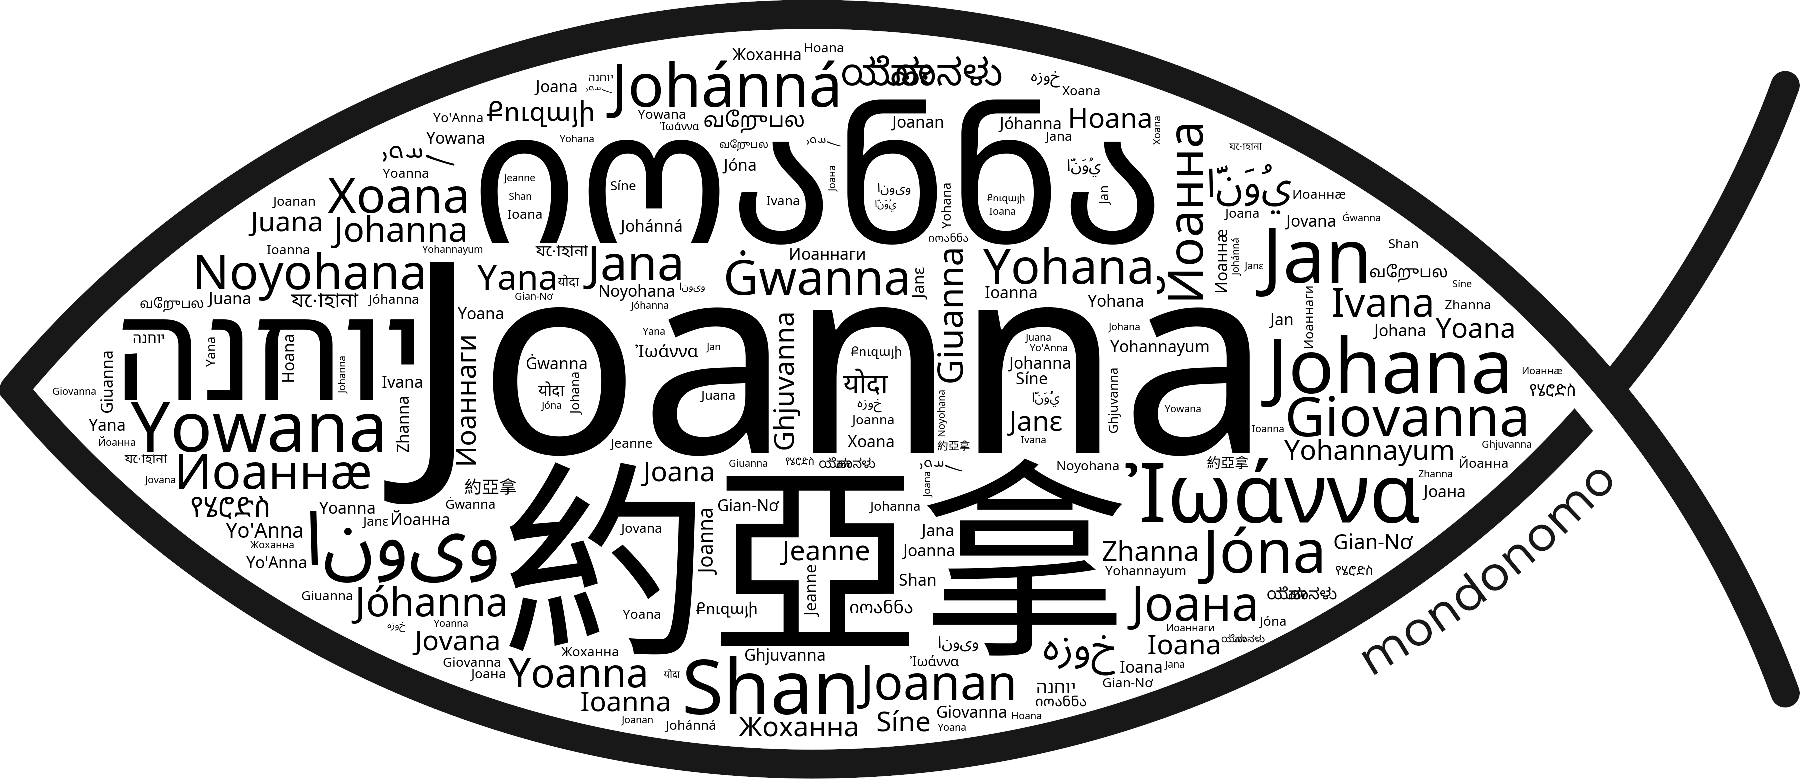 Name Joanna in the world's Bibles